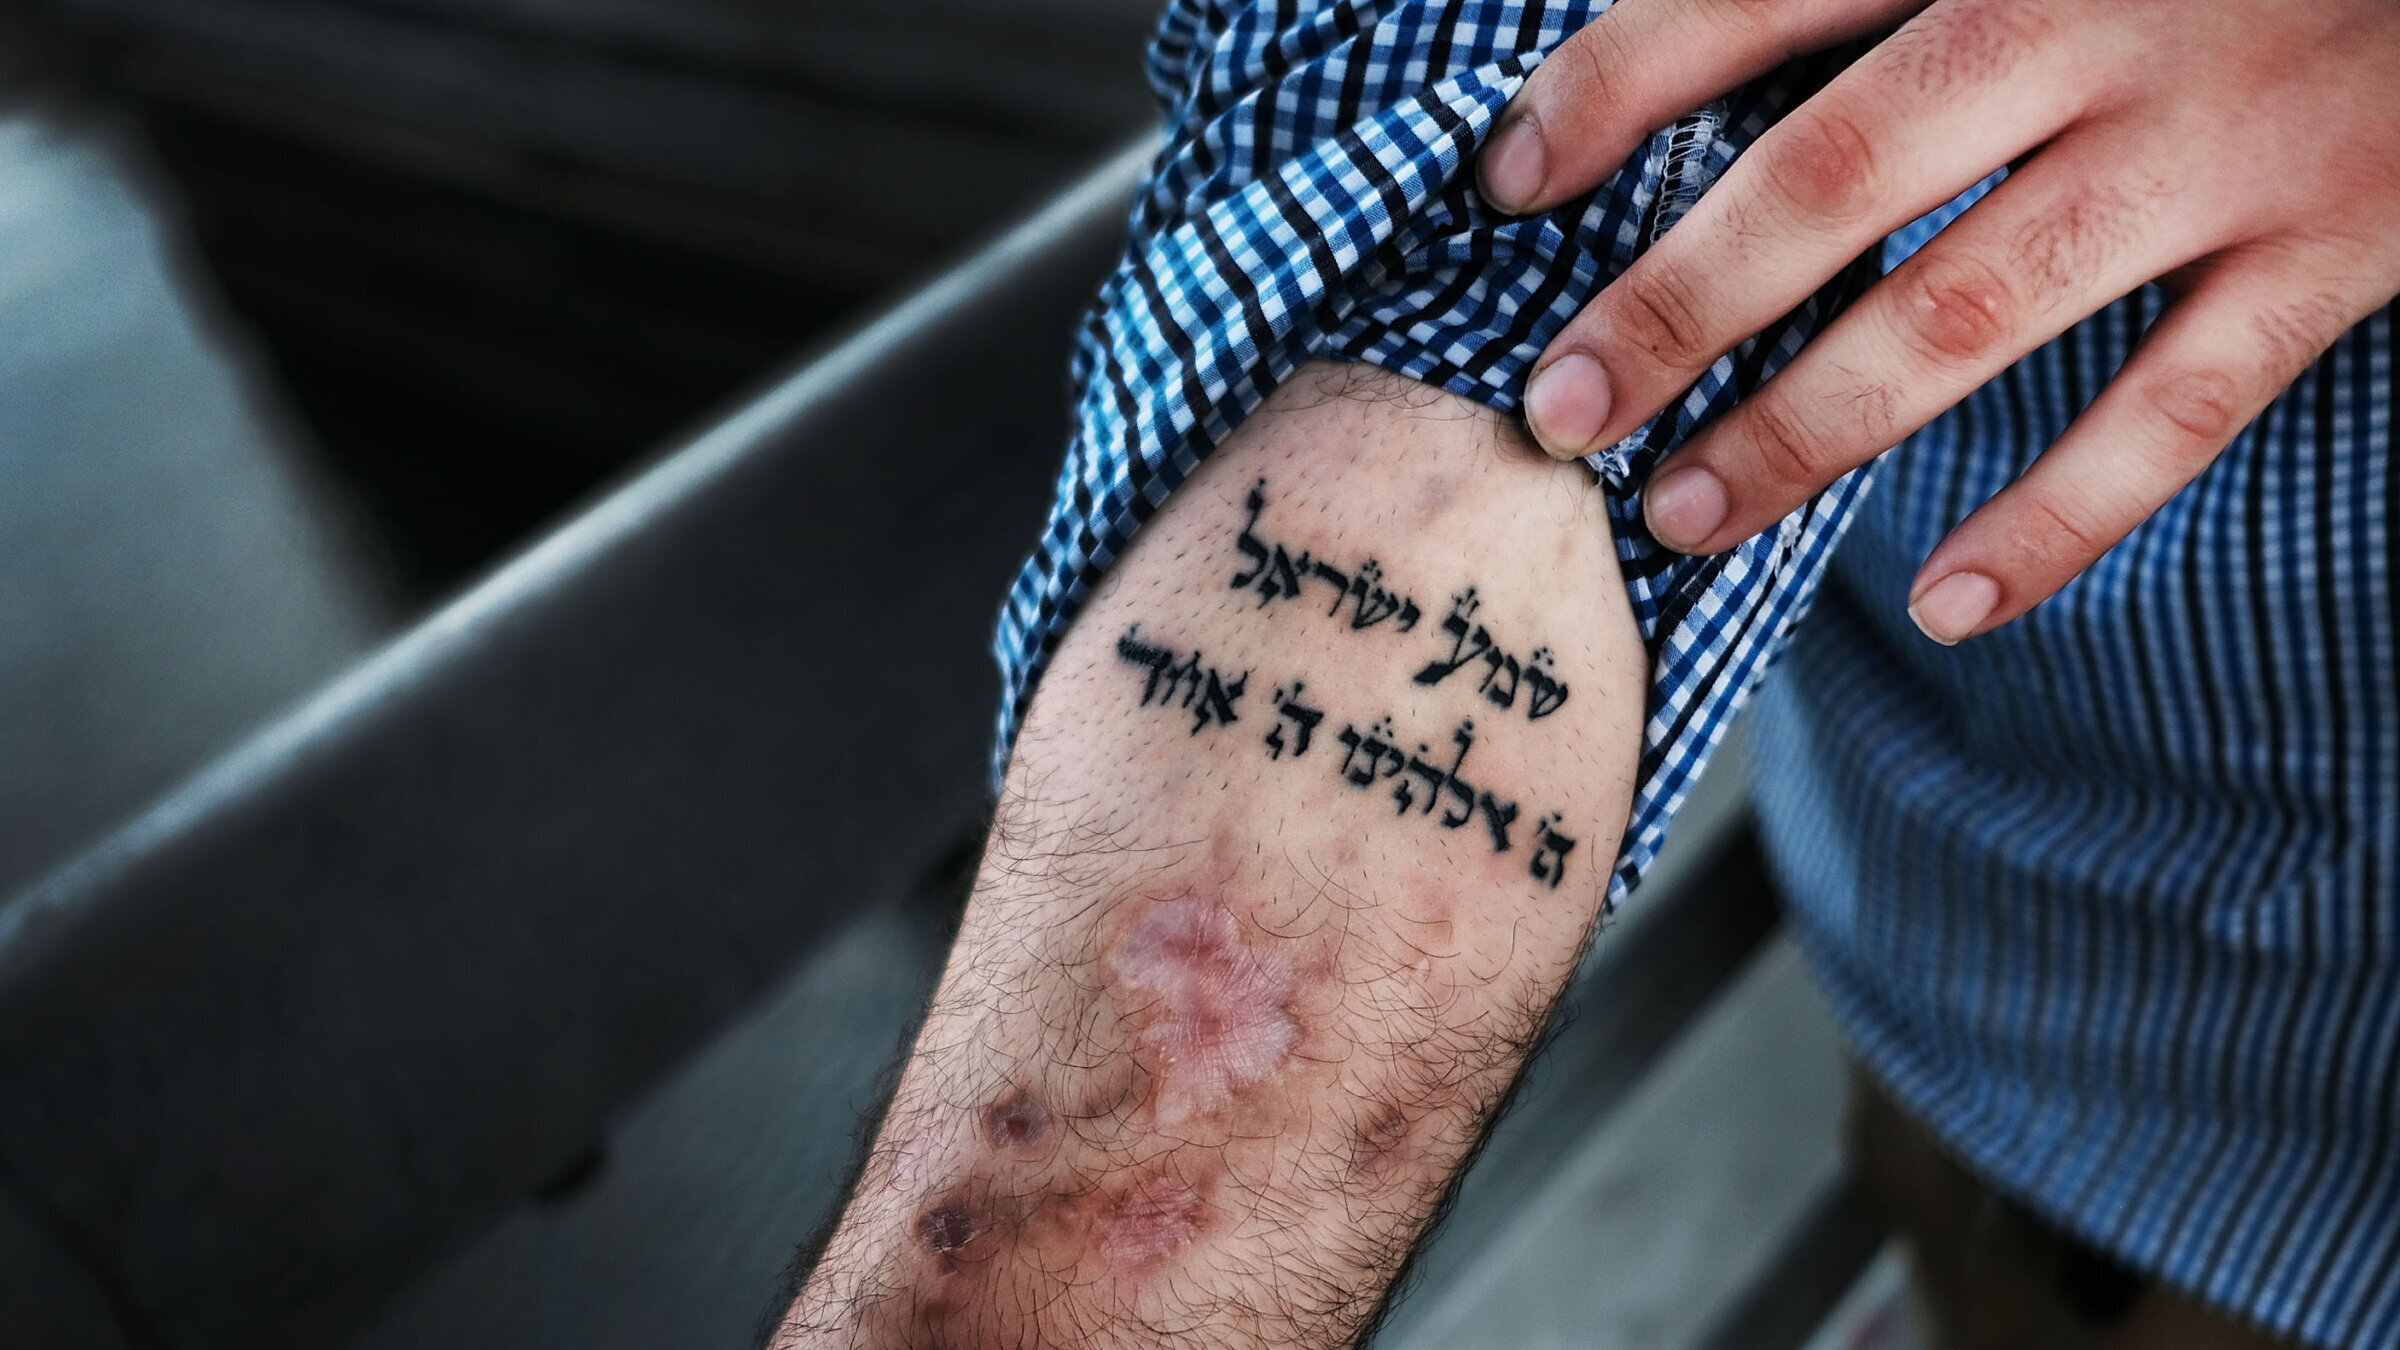 Michael, a patient at a Brooklyn methadone clinic for those addicted to heroin, displays a Hebrew tattoo of the "shema" prayer that he looks to in his fight with addiction.